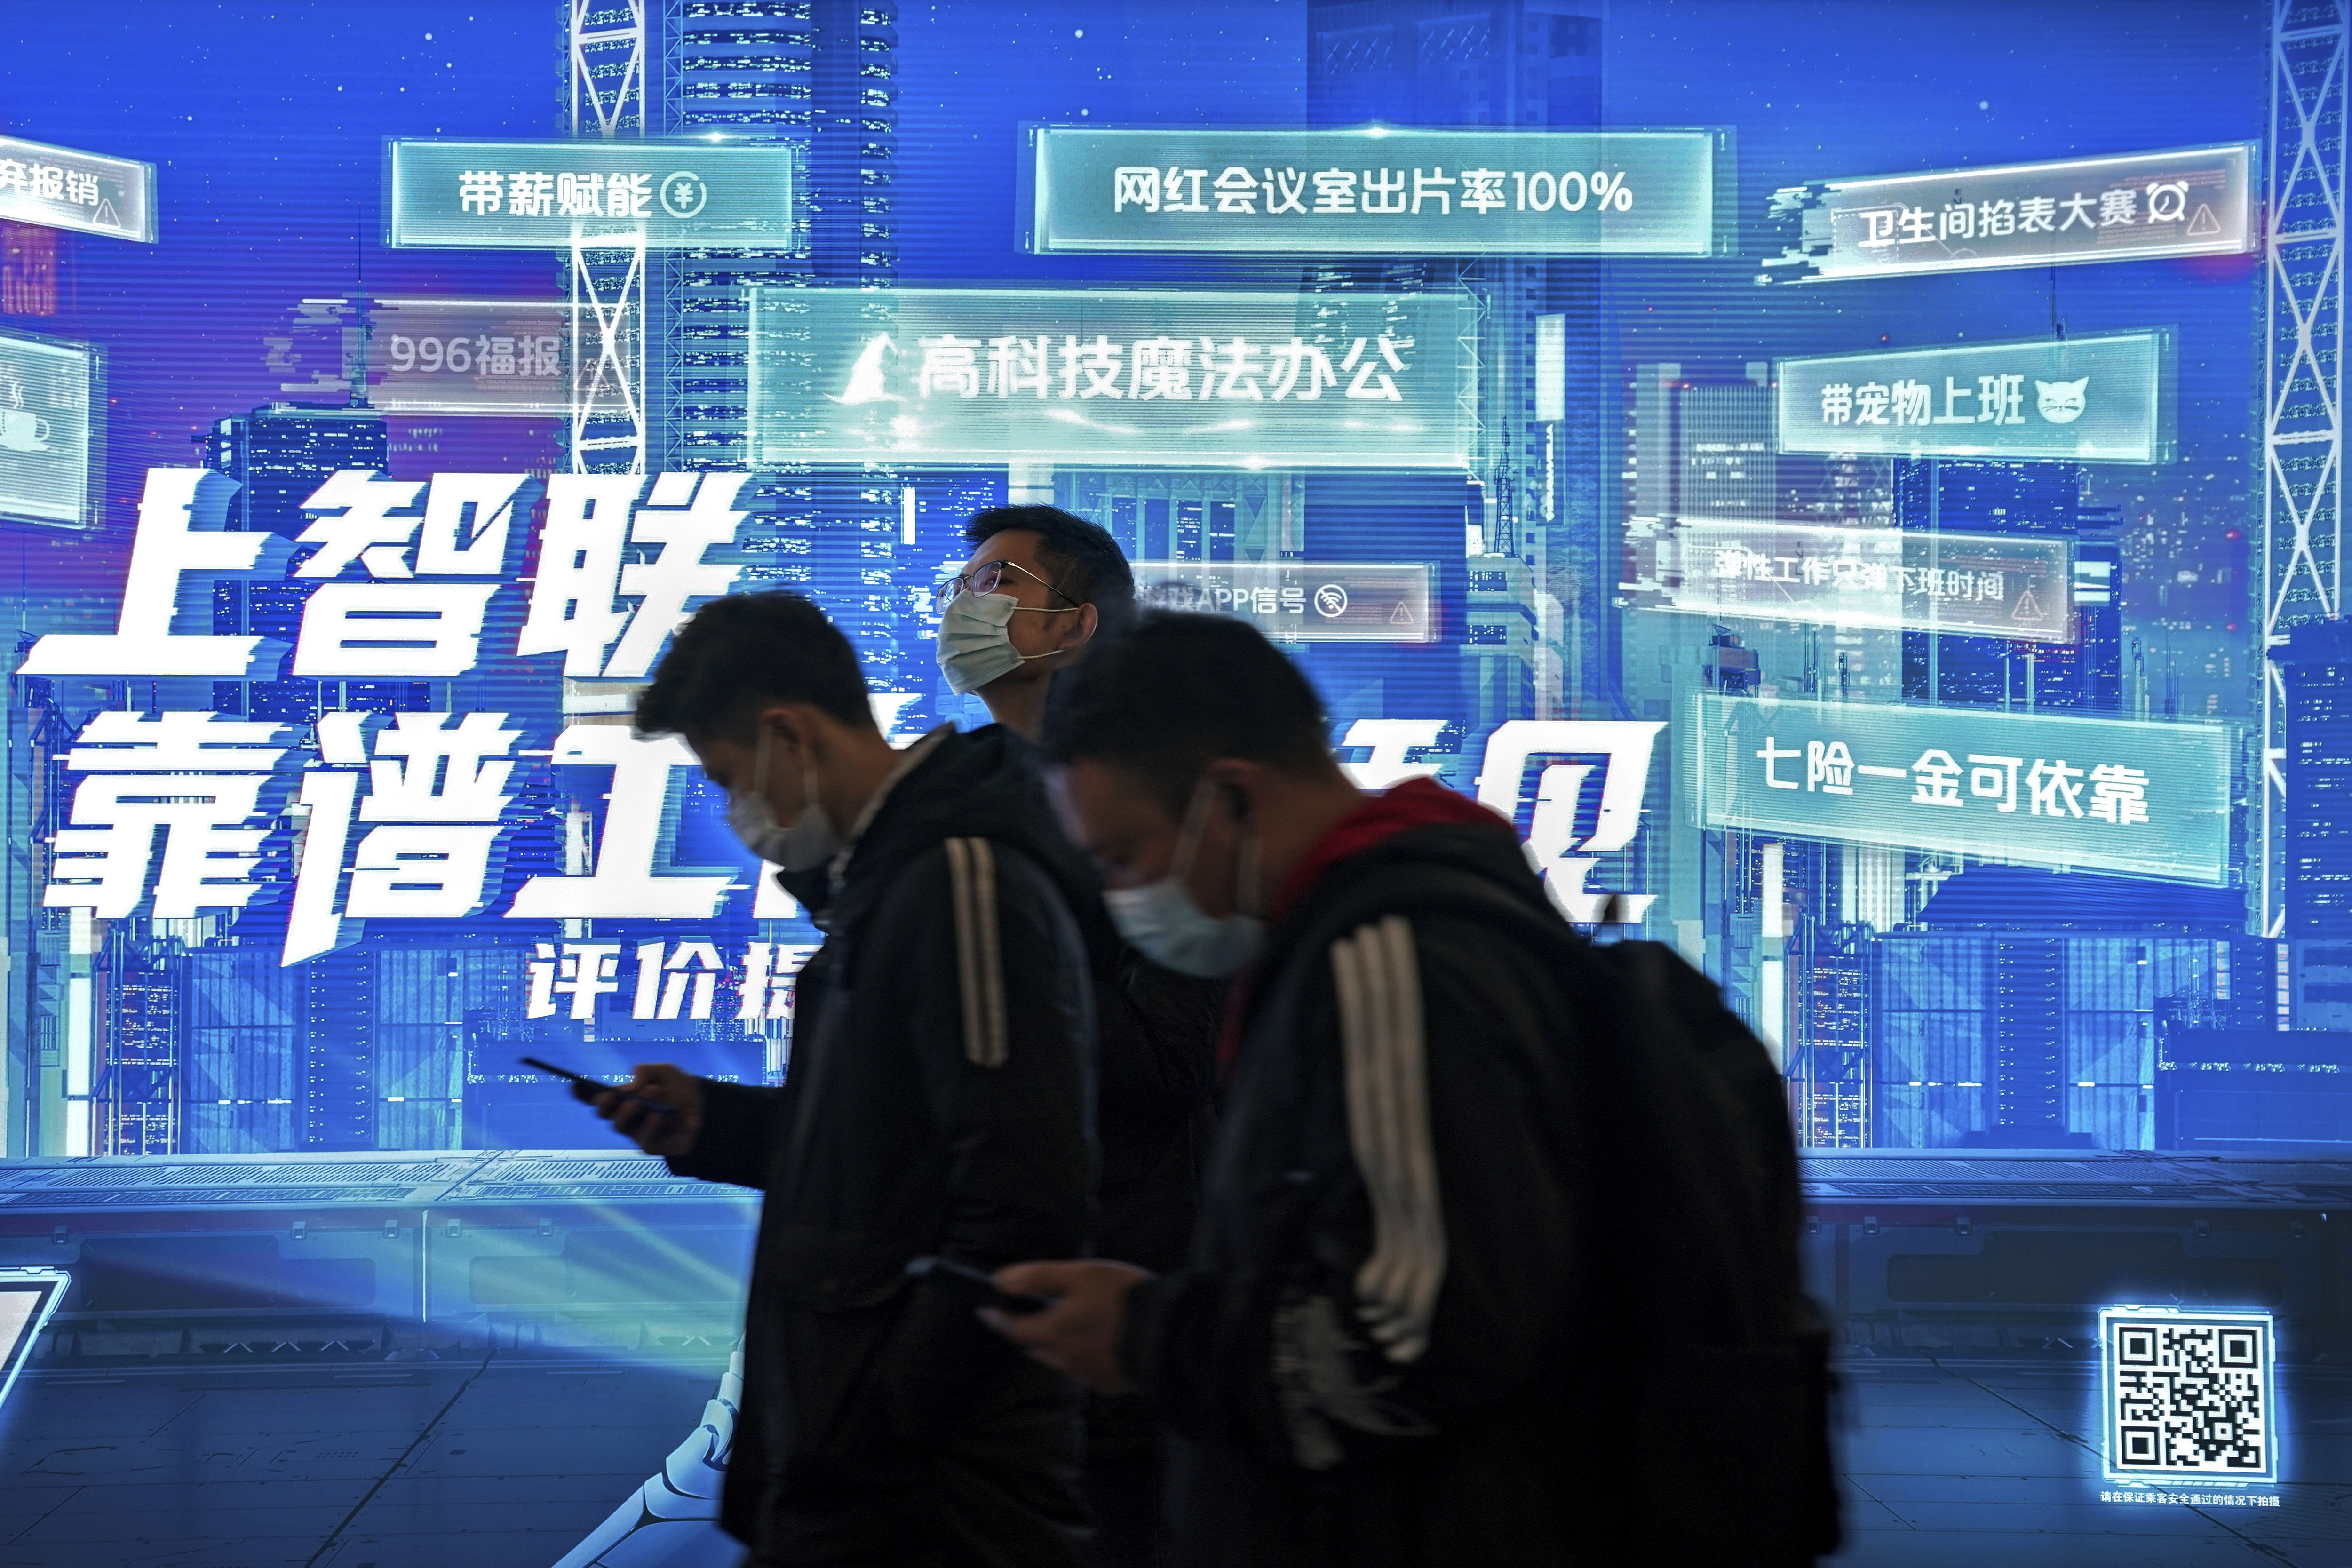 China’s upcoming data privacy law tightens scrutiny over how Big Tech companies gather and make use of private data. Photo: AP